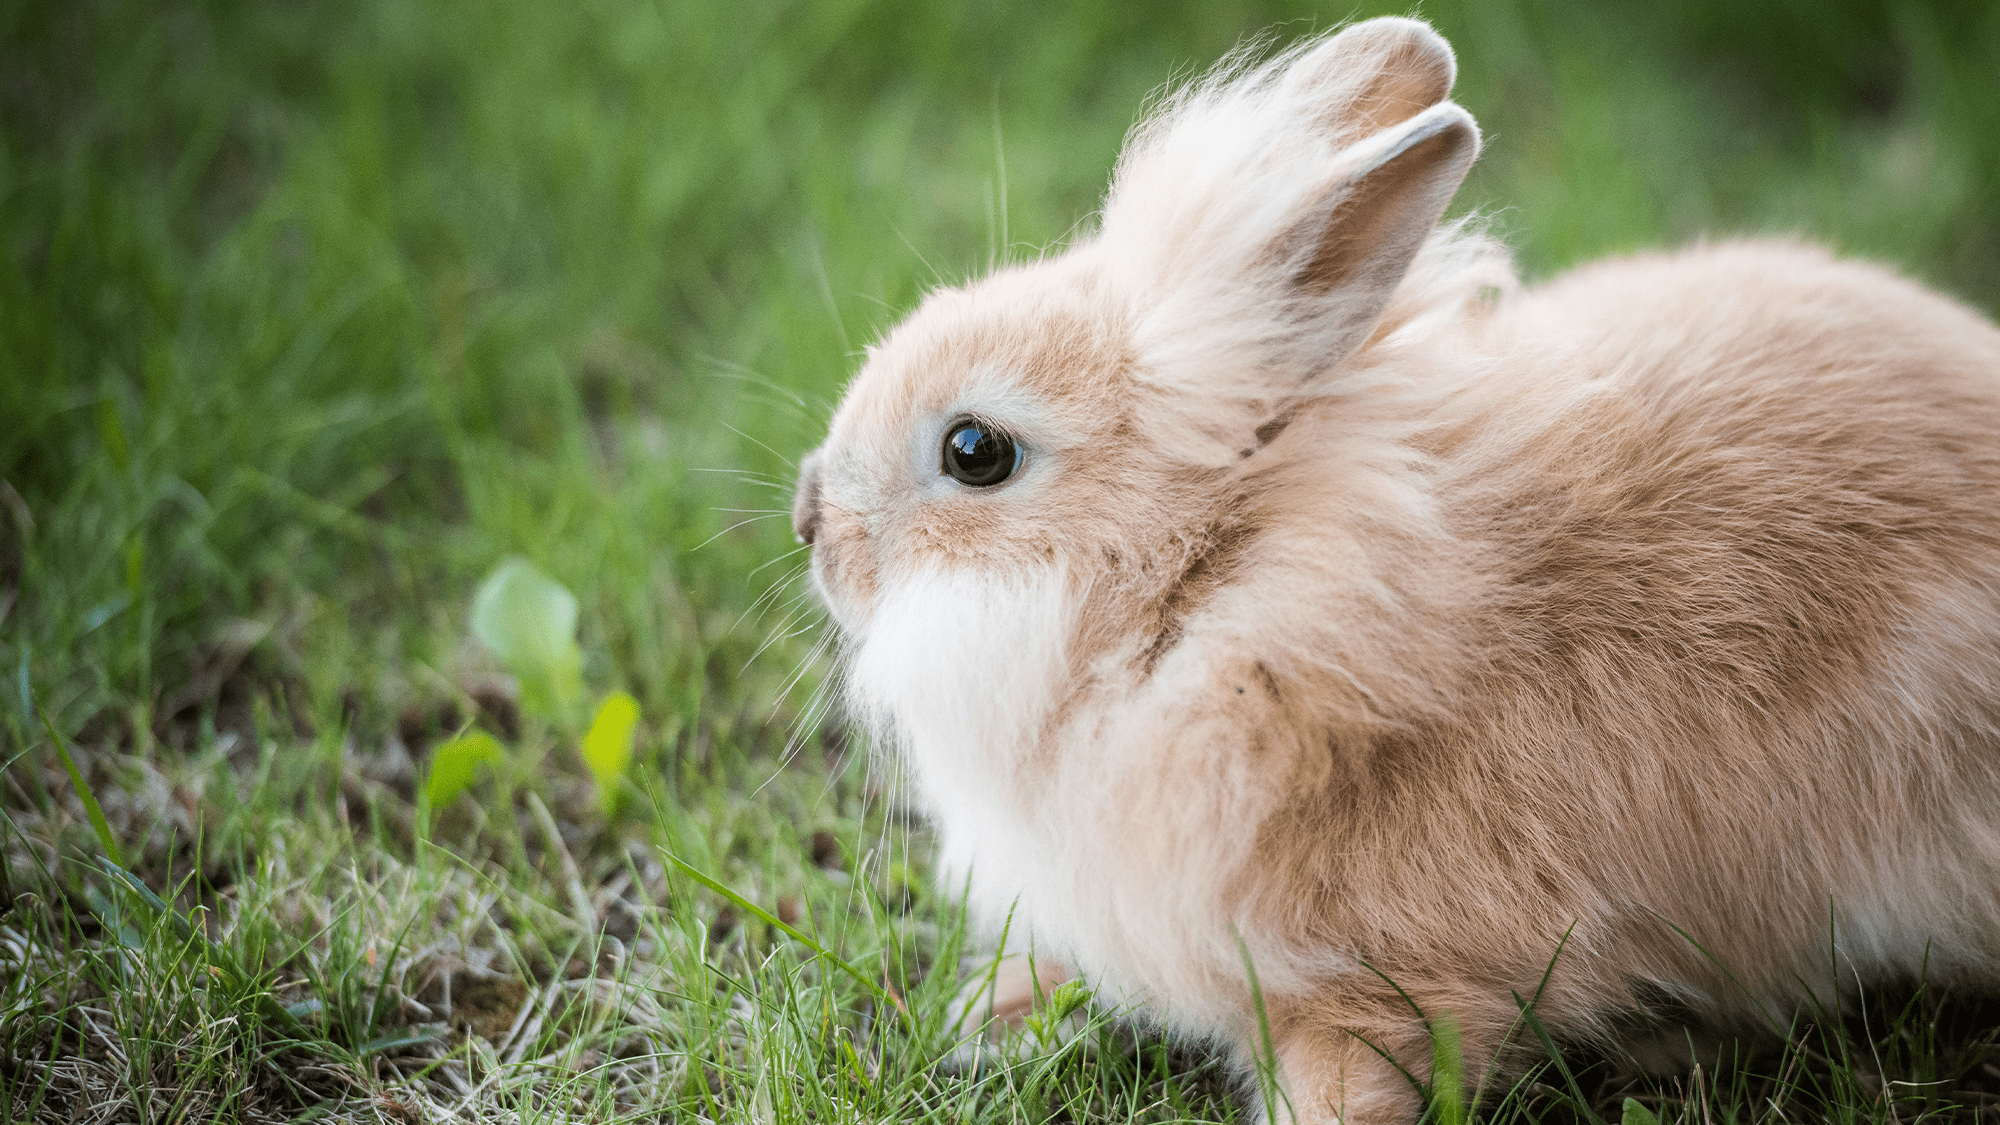 Florida suburb is overrun by fluffy rabbits after breeder goes rogue